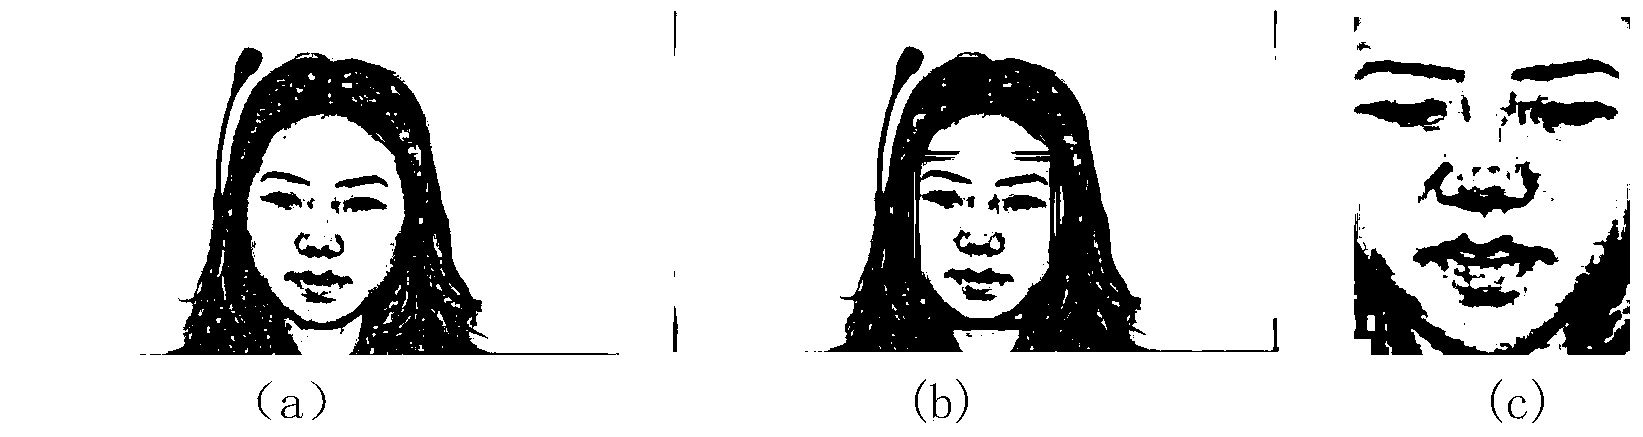 Face microexpression recognition method